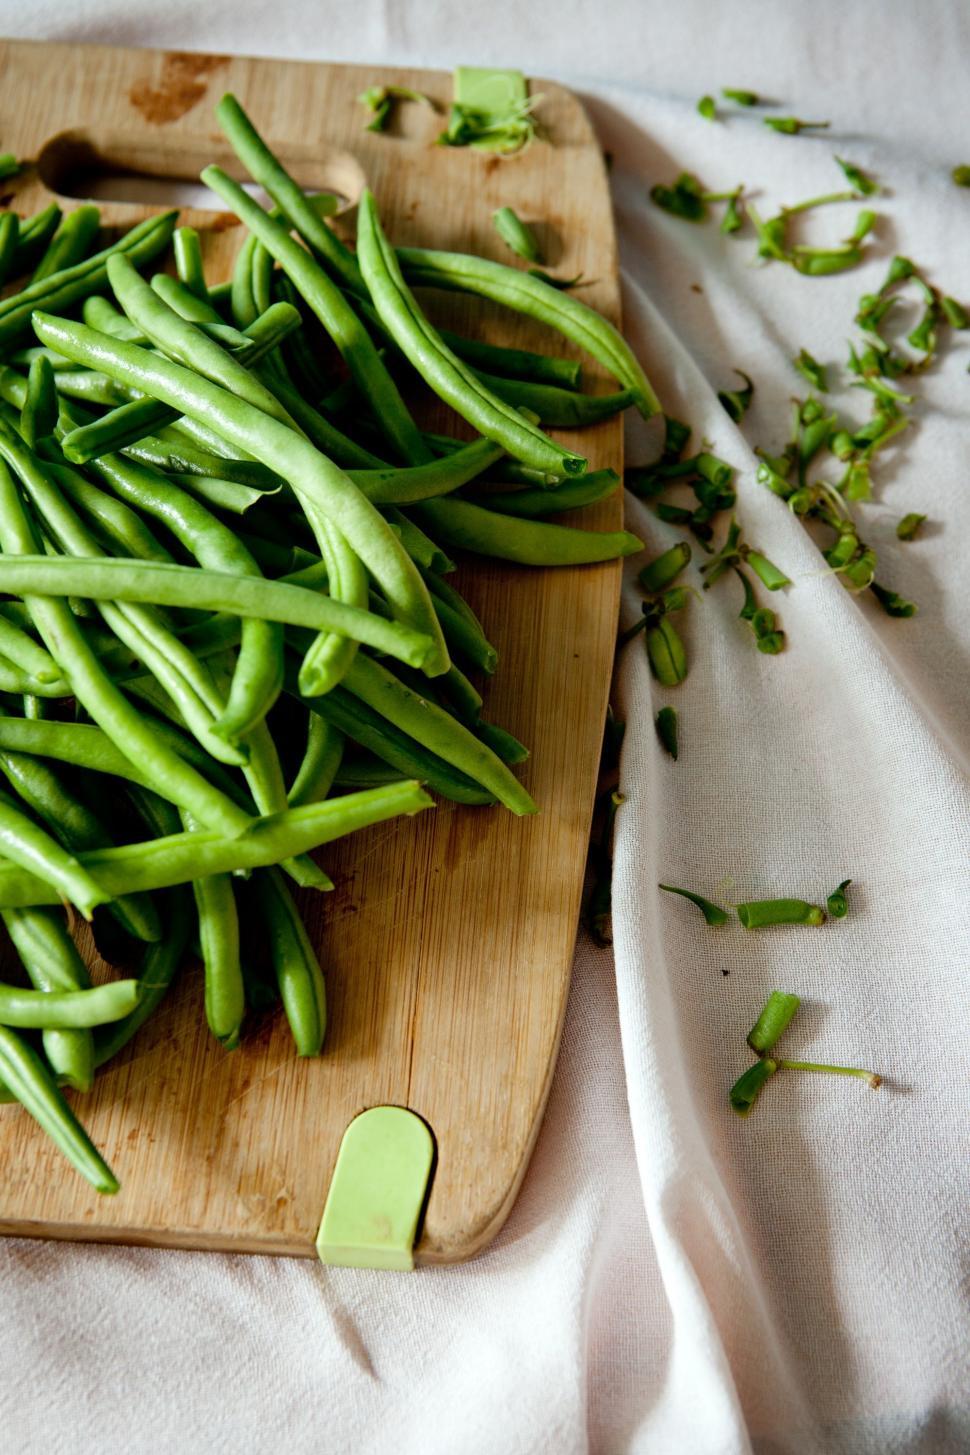 Free Image of Wooden Cutting Board With Green Beans 